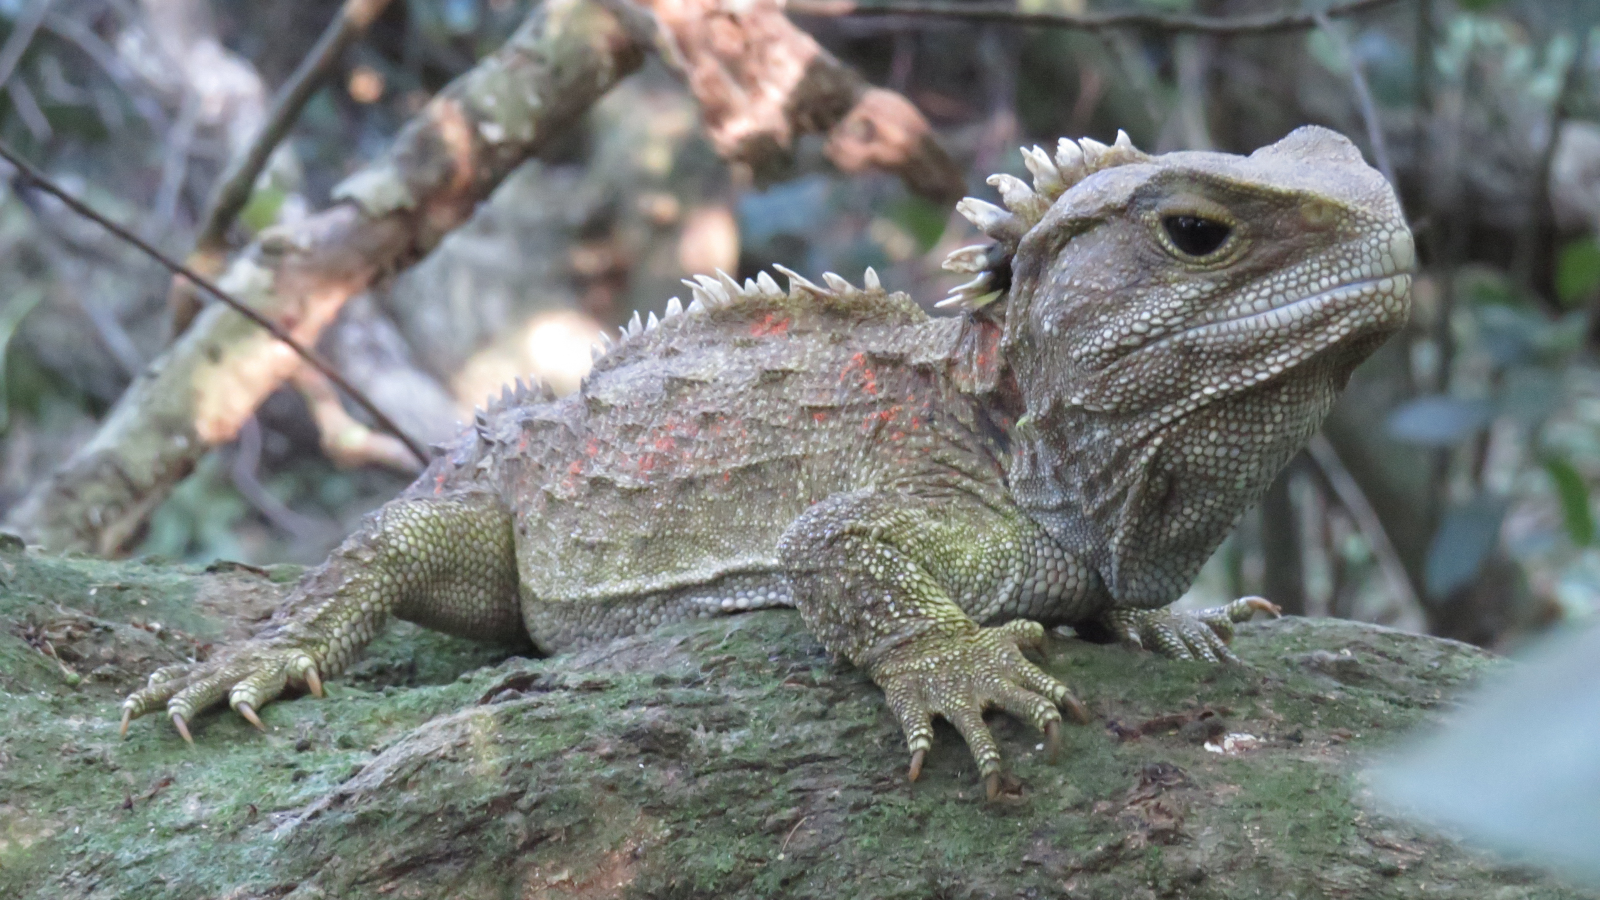 Everything you need to know about tuatara sperm (but were too afraid to ask)